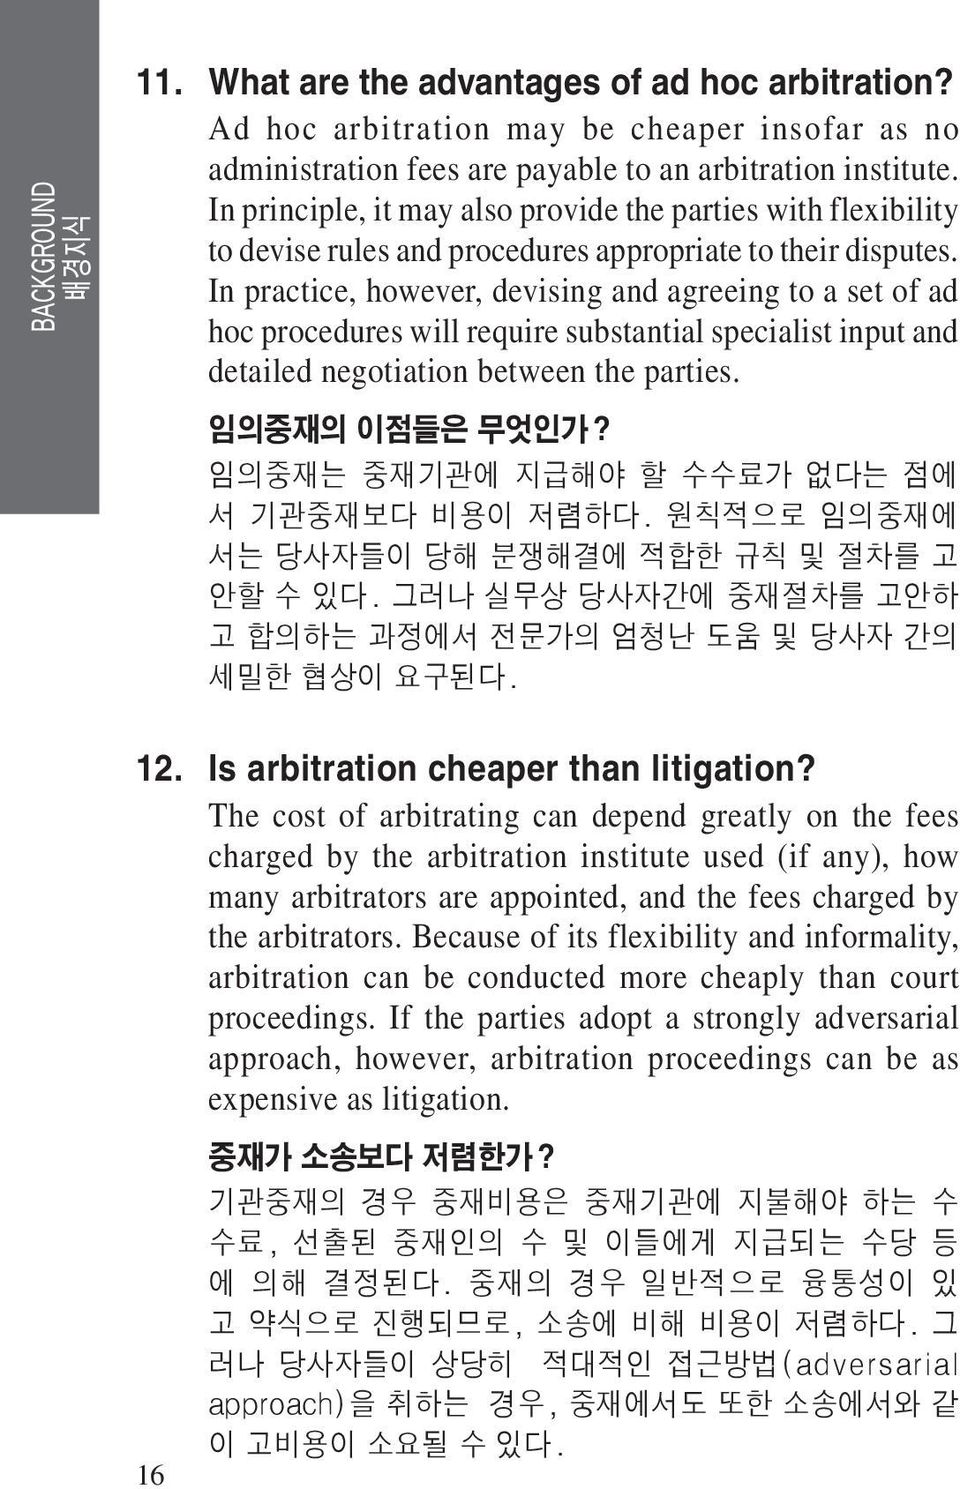 In practice, however, devising and agreeing to a set of ad hoc procedures will require substantial specialist input and detailed negotiation between the parties. 임의중재의 이점들은 무엇인가?